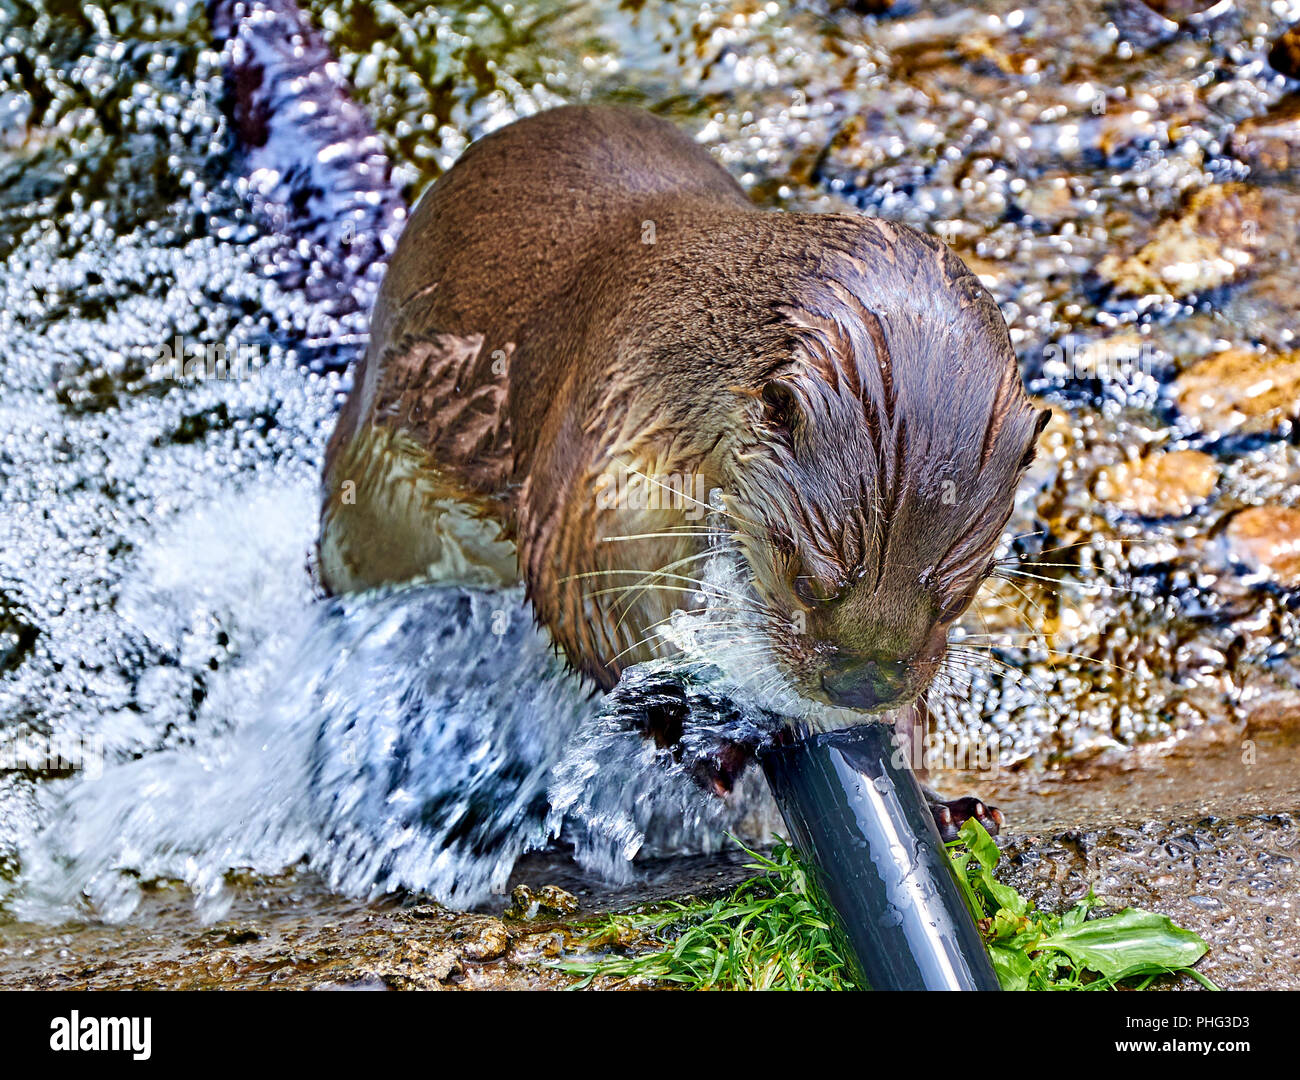 North American river otter (at a sanctuary) playing with water coming out of a hose Stock Photo